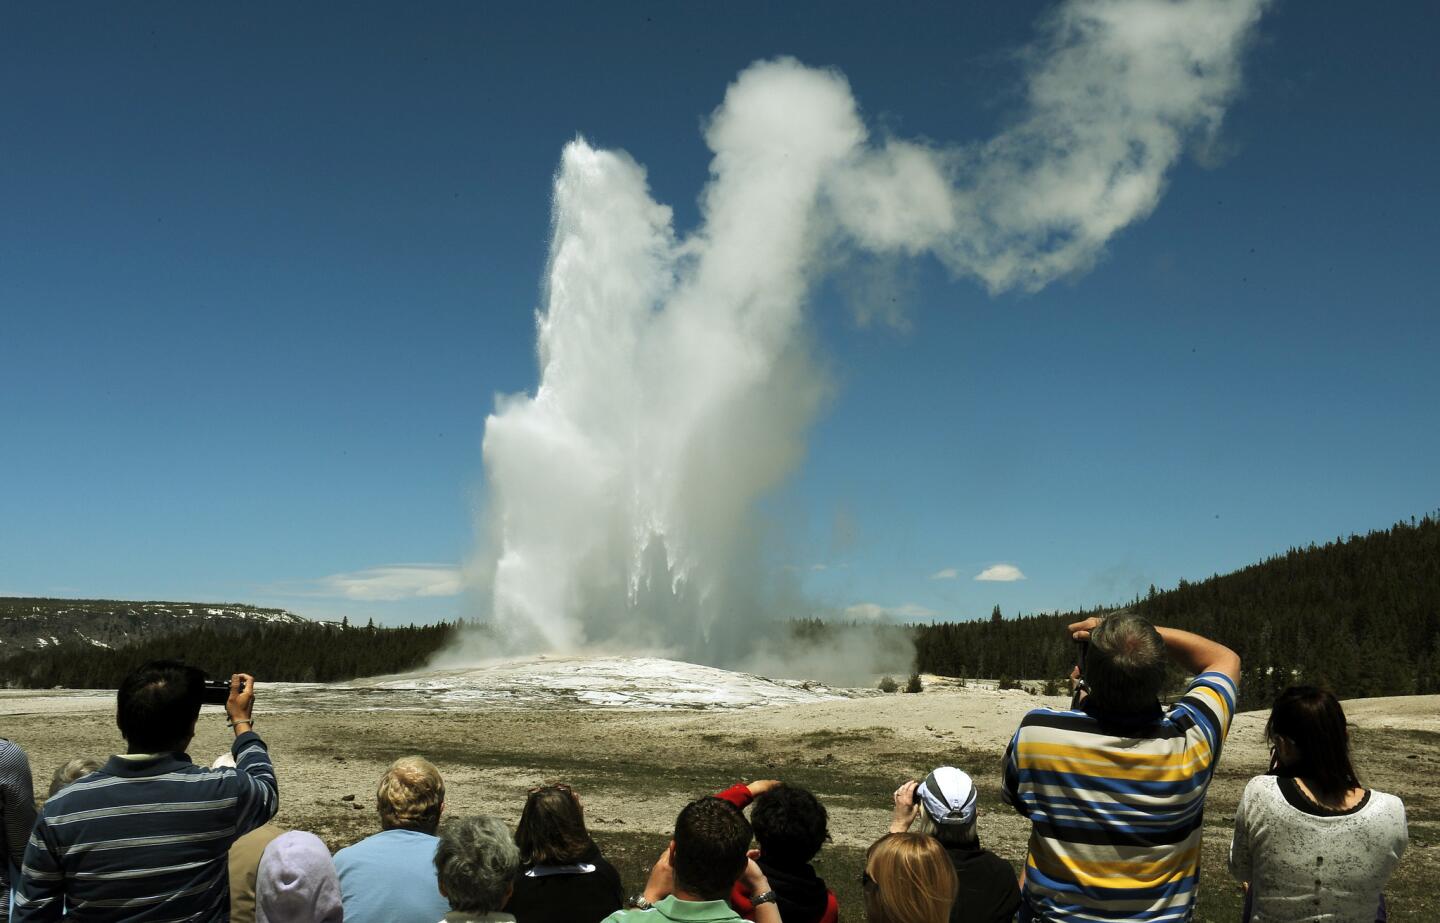 Tourists watch Old Faithful, a large geyser that erupts on average every 90 minutes, in Yellowstone National Park. The park, established in 1872, is primarily in Wyoming, though it also extends into Montana and Idaho. It was the first national park in the United States.